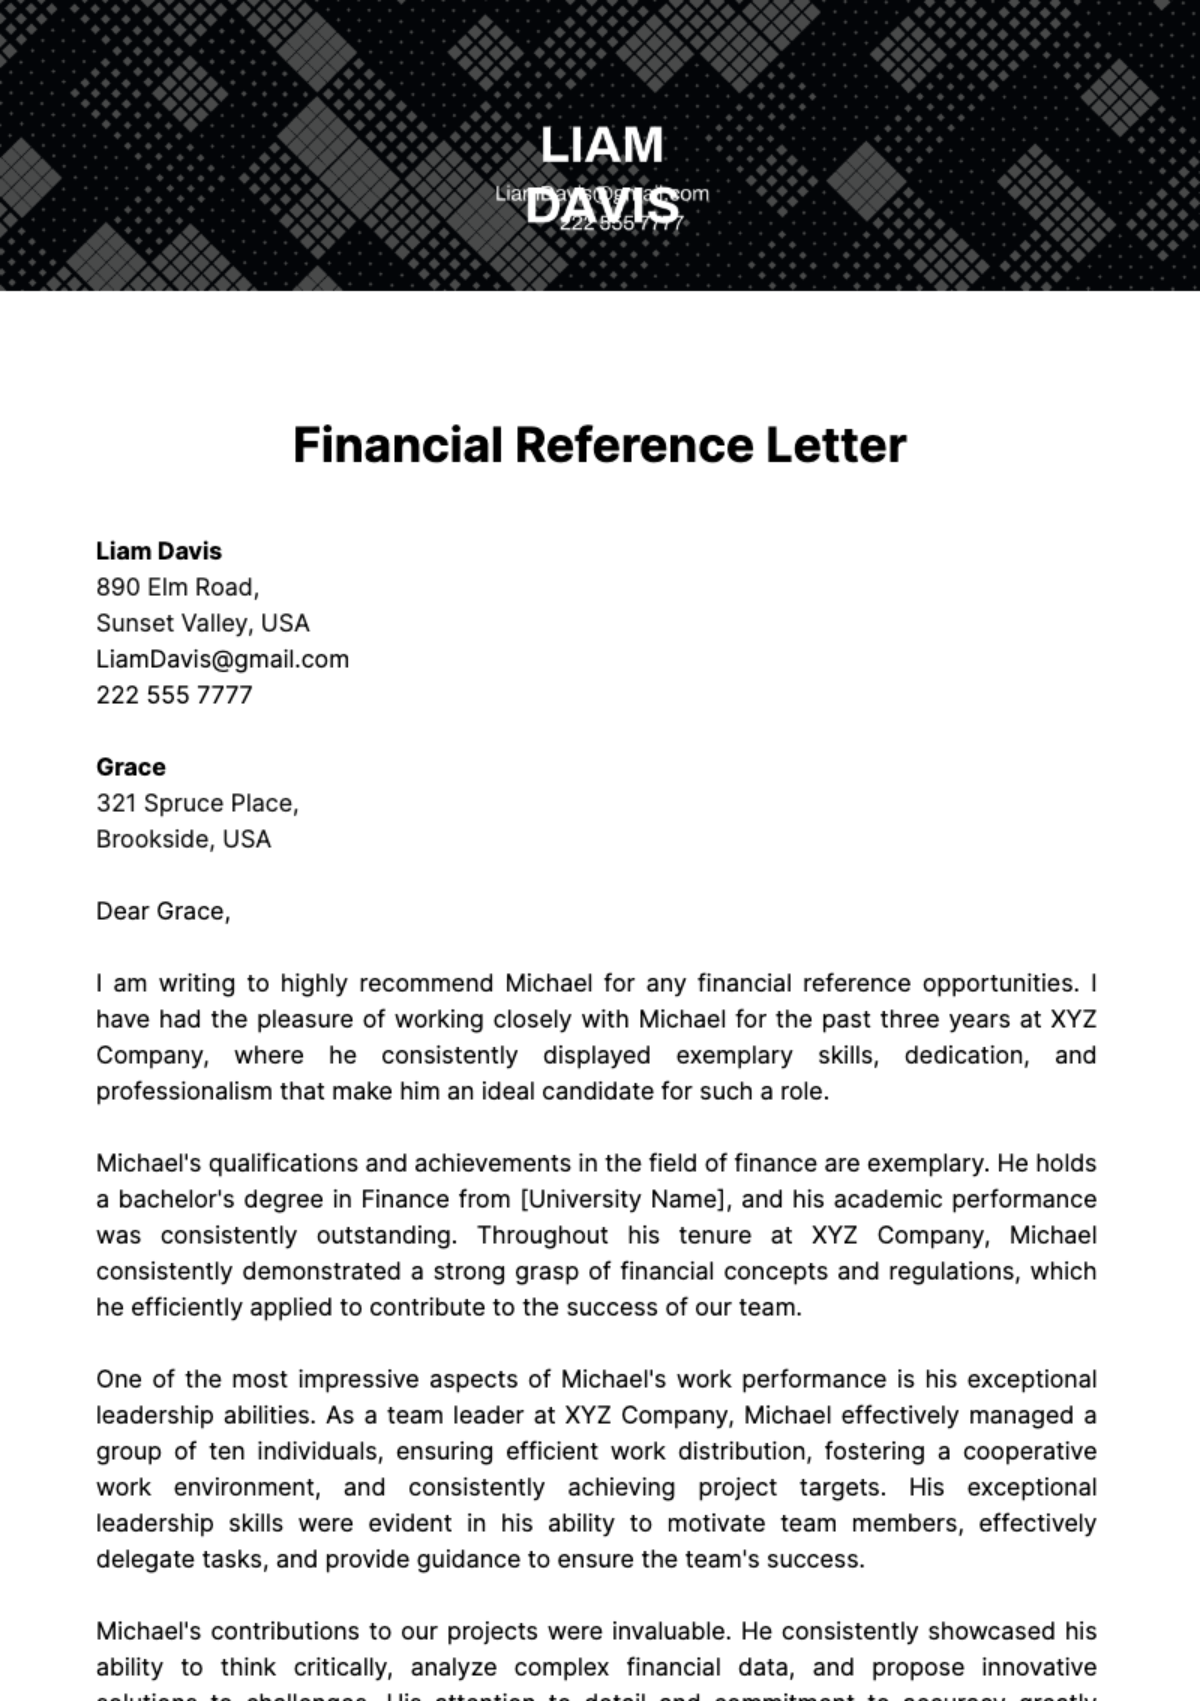 Free Financial Reference Letter Template